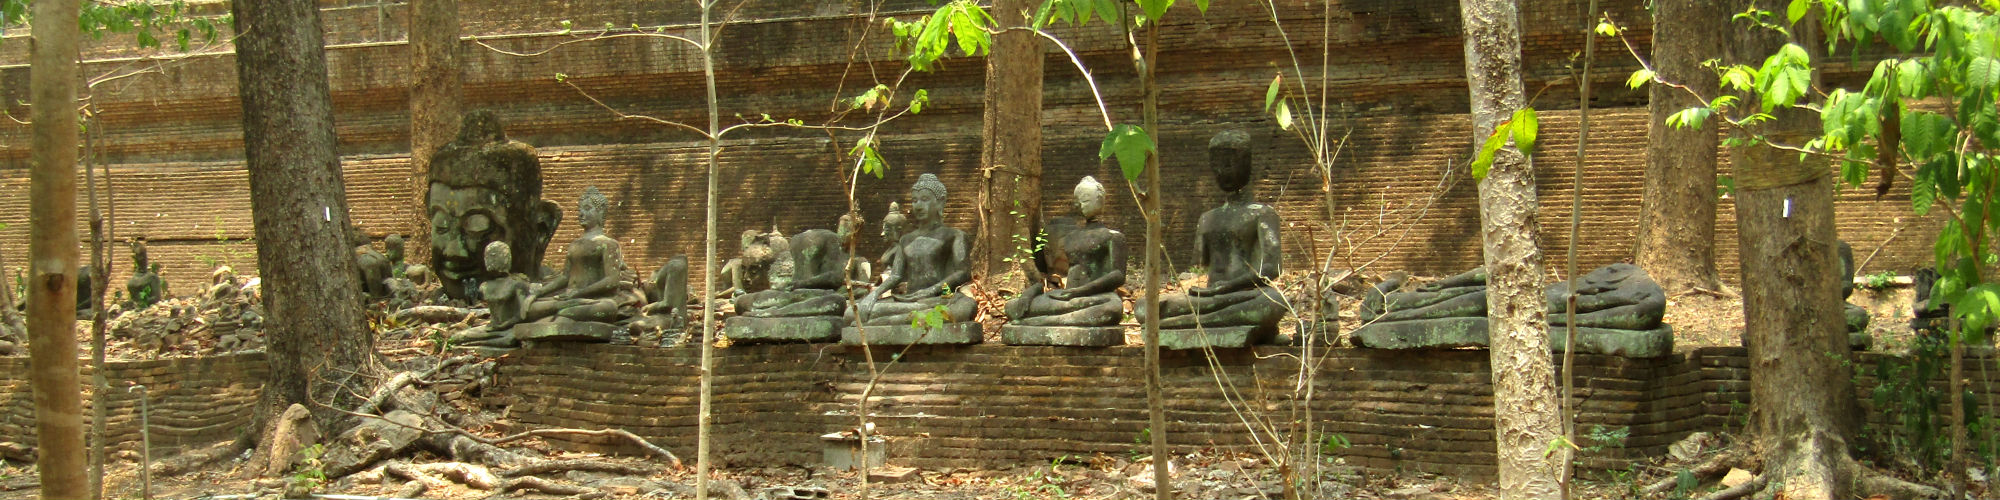 15th/16th Century Buddha Images at Wat Umong Suan Phutthatham, Mueang Chaing Mai District, Chiang Mai Province